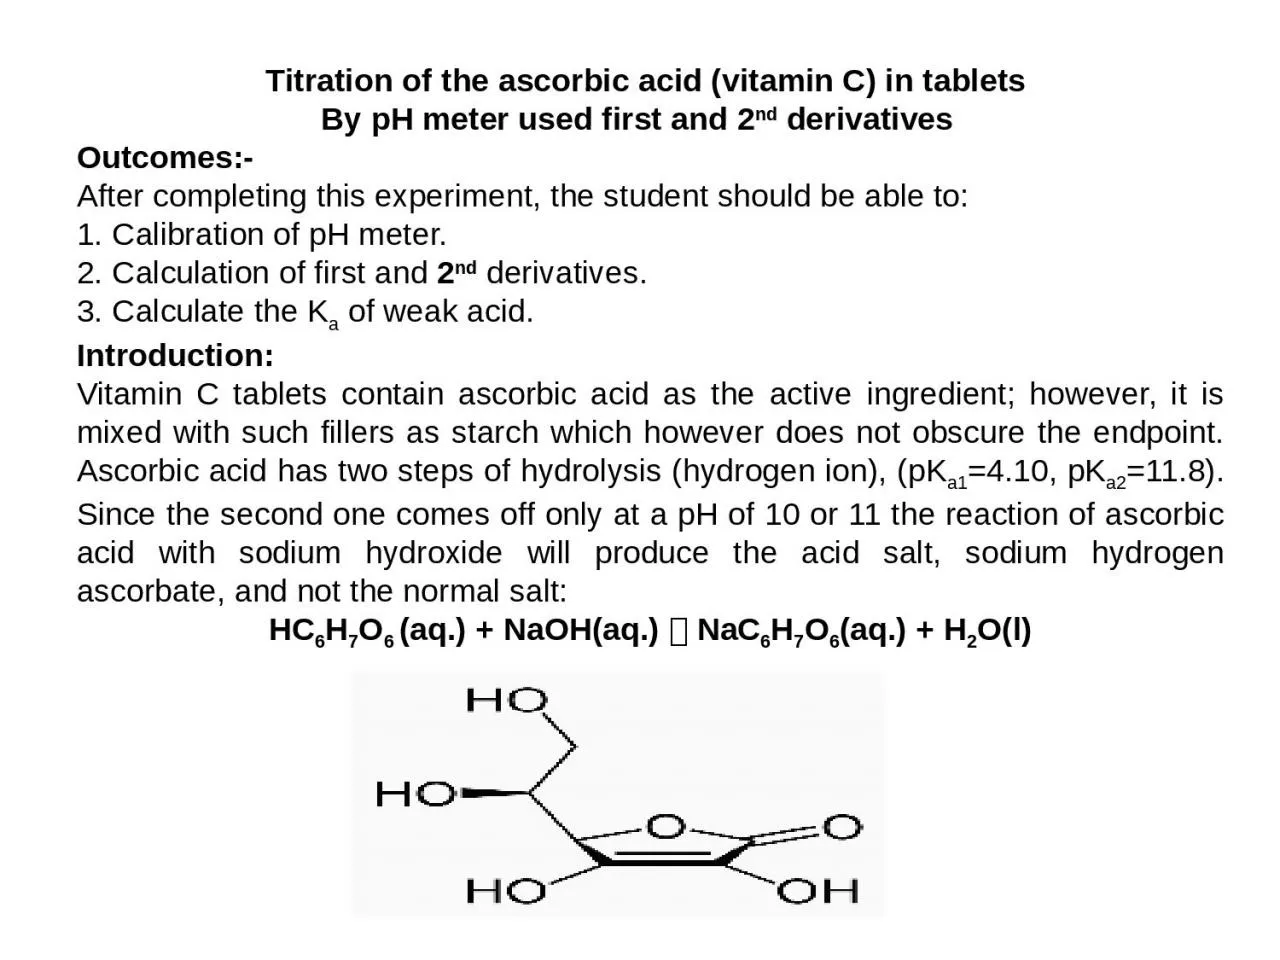 Titration of the ascorbic acid (vitamin C) in tablets